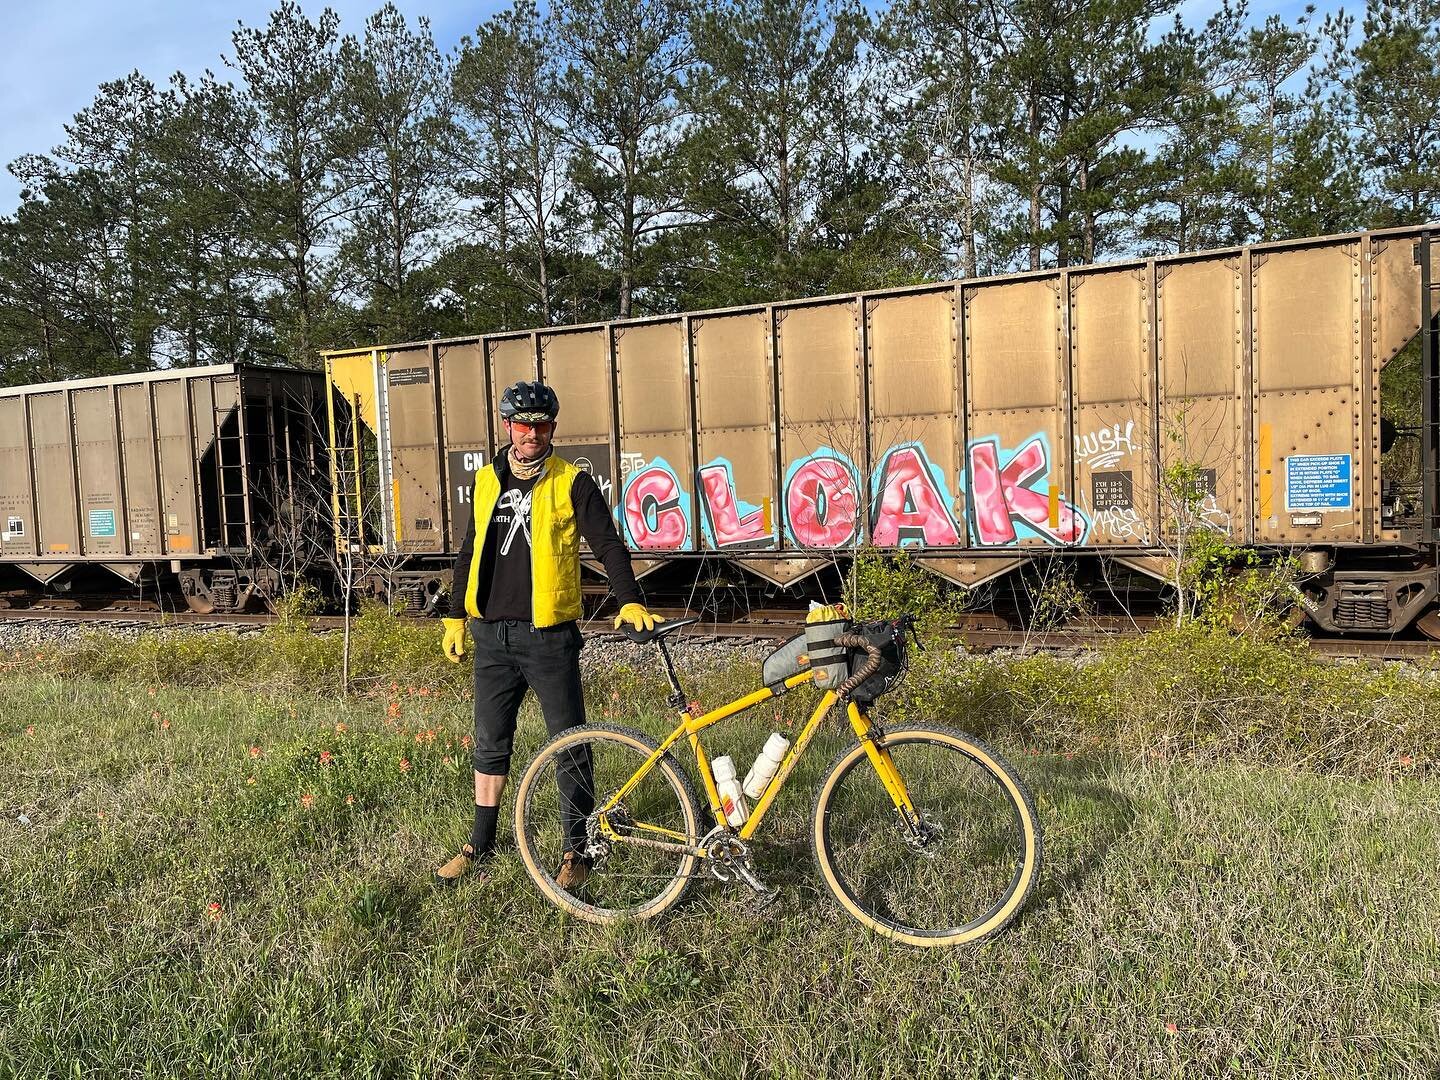 My second run at the East Texas Showdown started pretty rough for everyone: drizzle, 40 degree temps, 15mph headwind, and sloppy, sandy roads that chewed up drivetrains. I pushed far too hard for the first 60 miles, forgetting the @bicyclesociety man